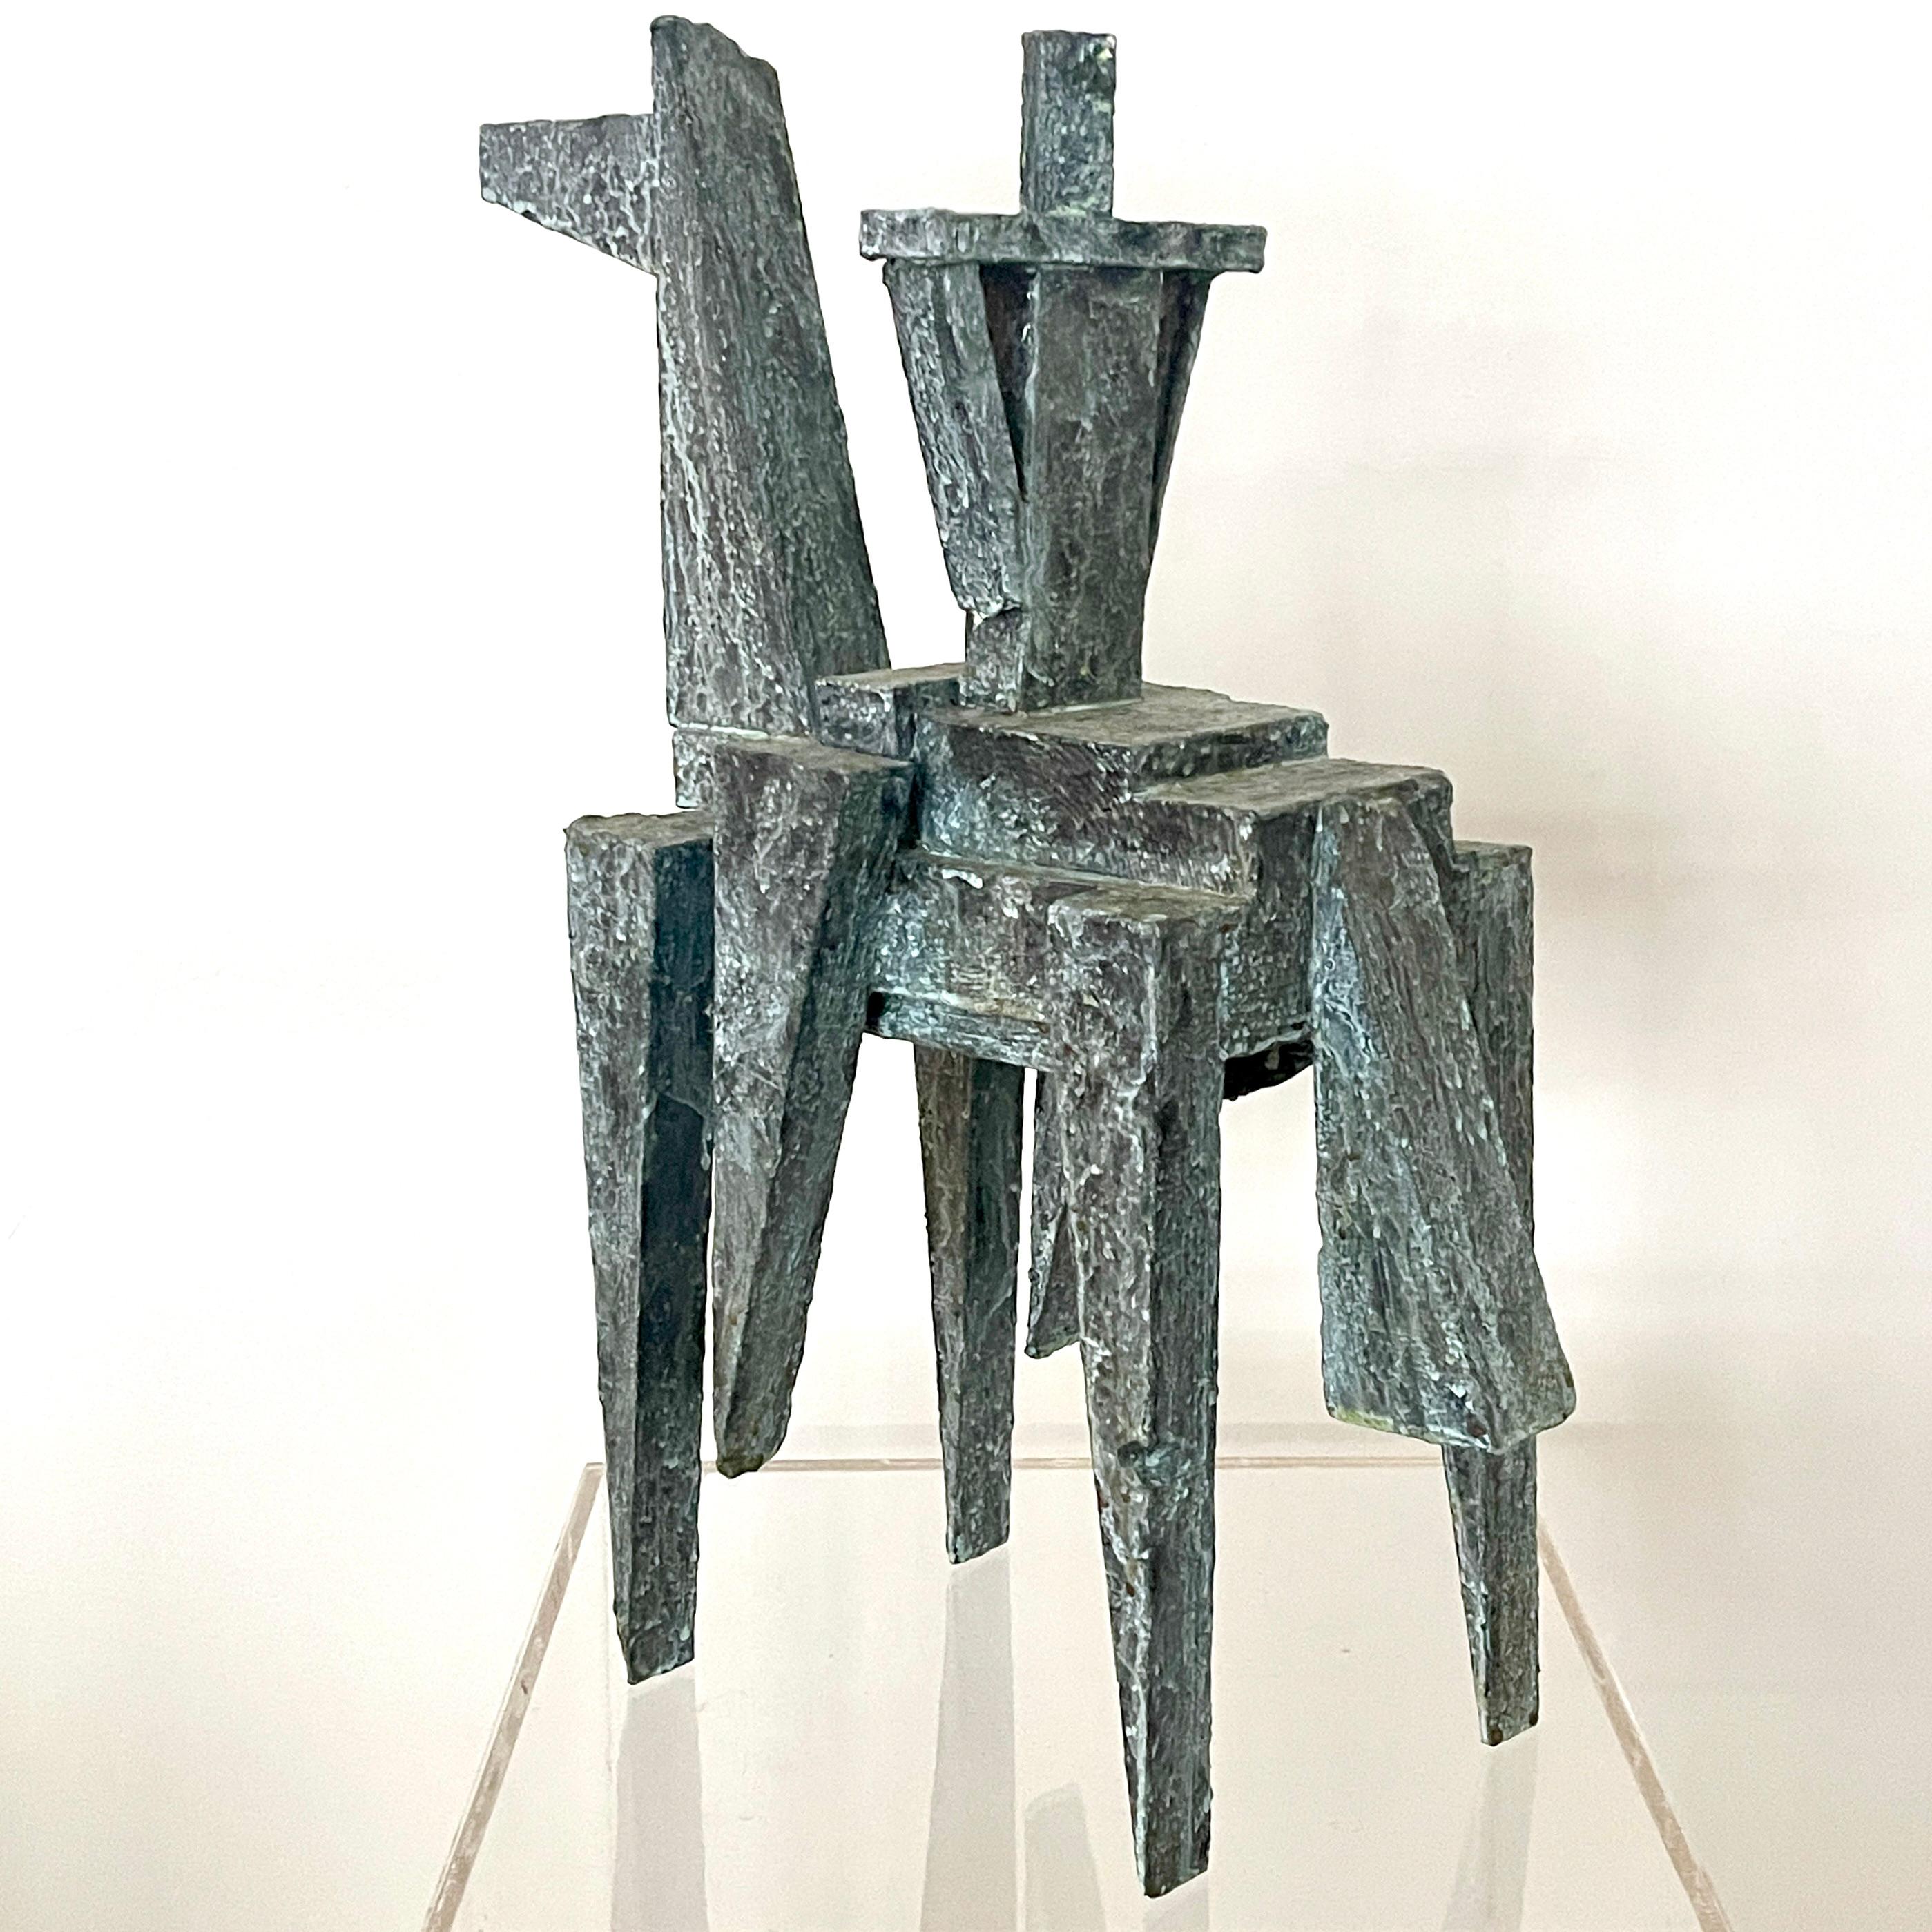 Modernist Cubist Sculpture by Bill Low with Weathered Bronze Finish For Sale 5